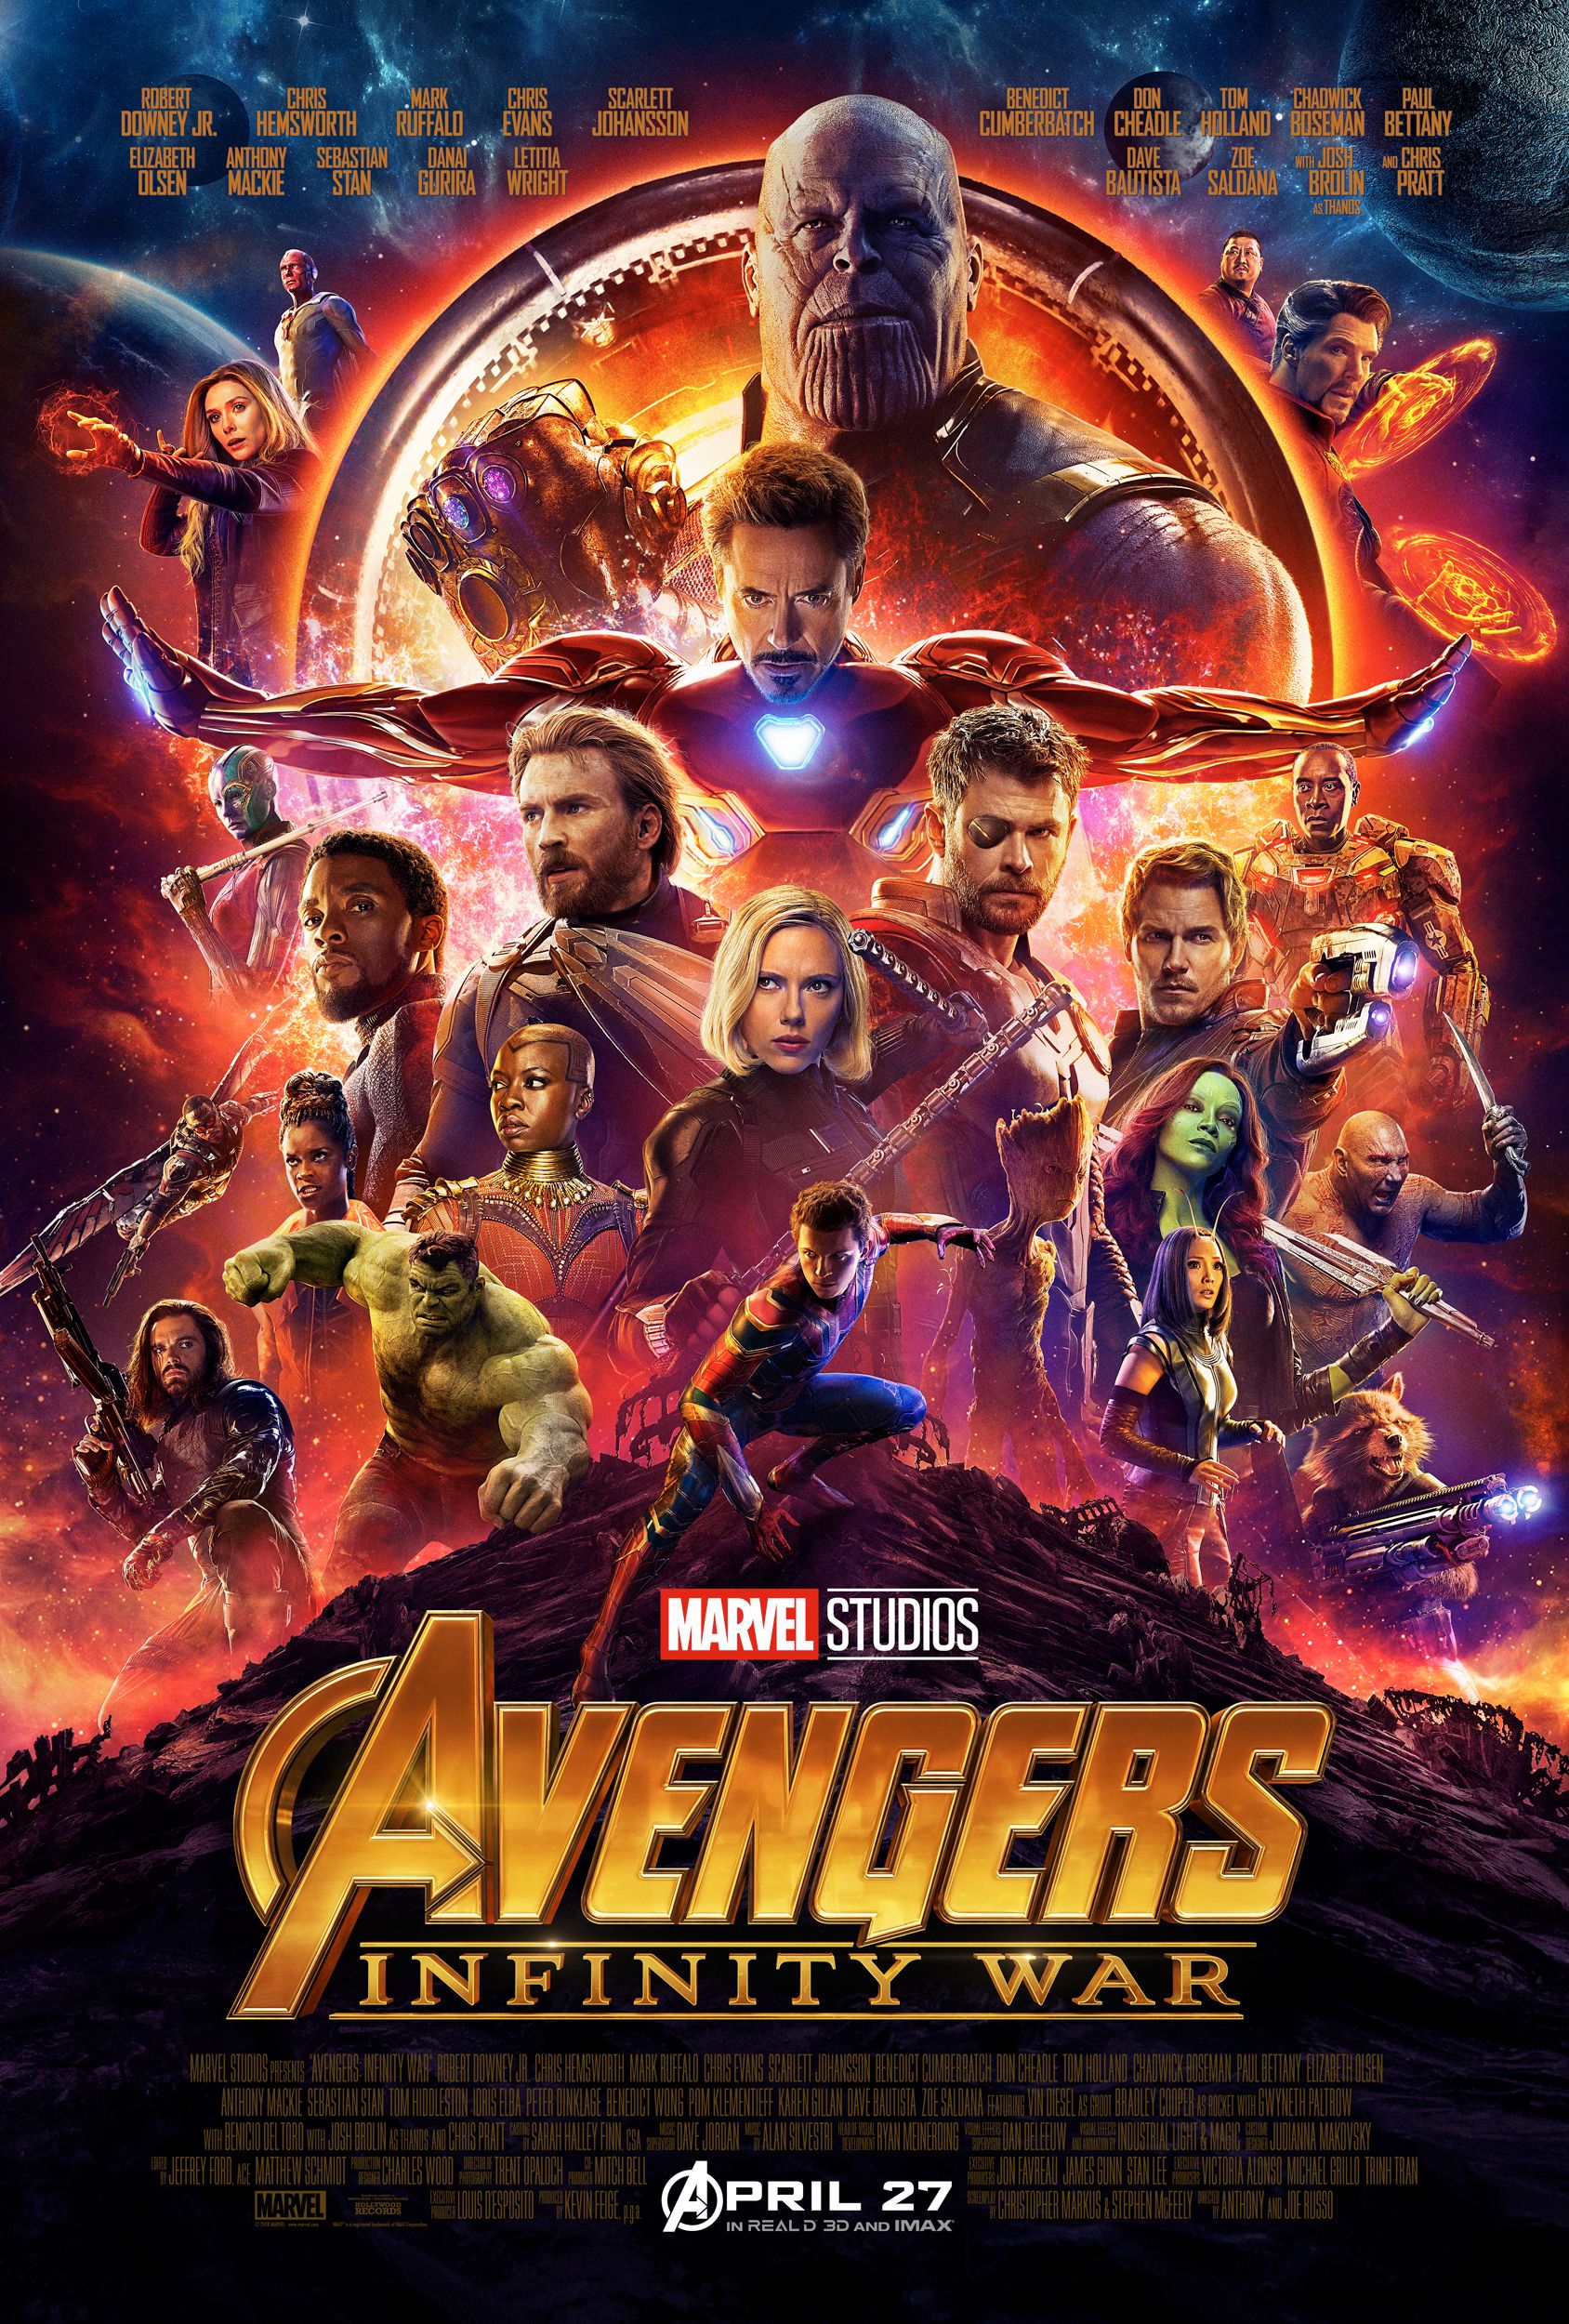 Avengers Infinity War Payoff Poster